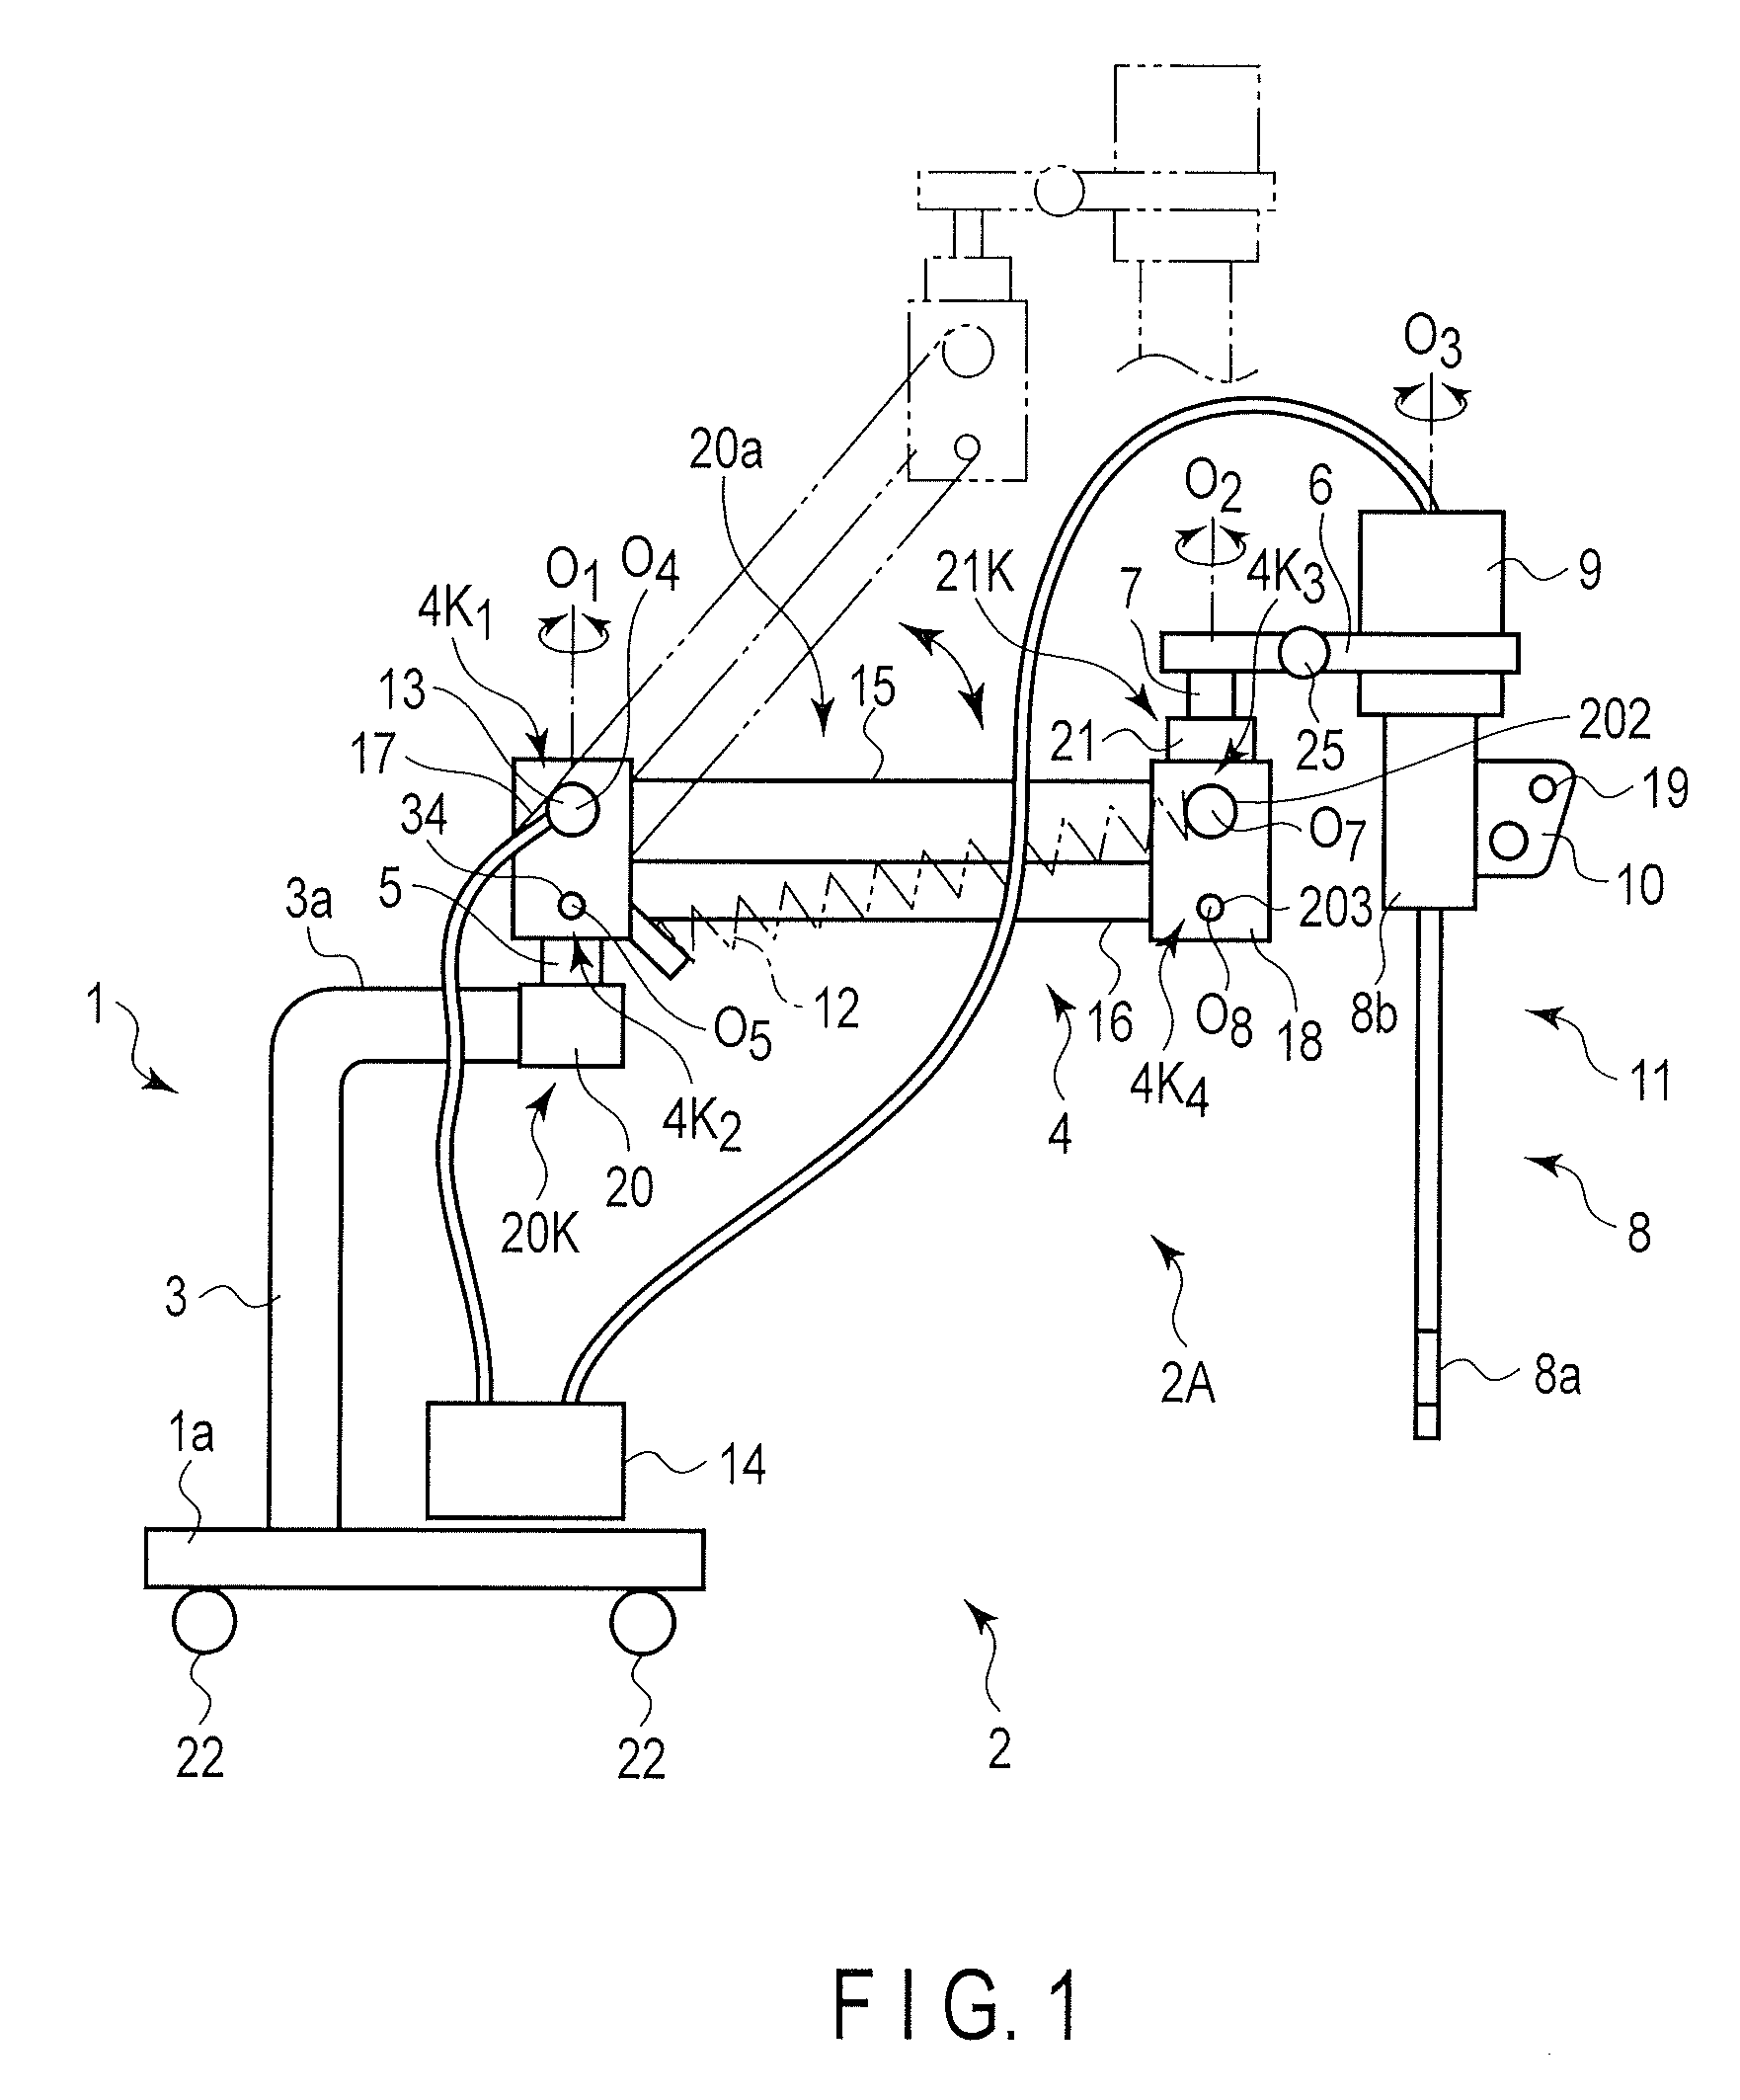 Supporting apparatus for medical device